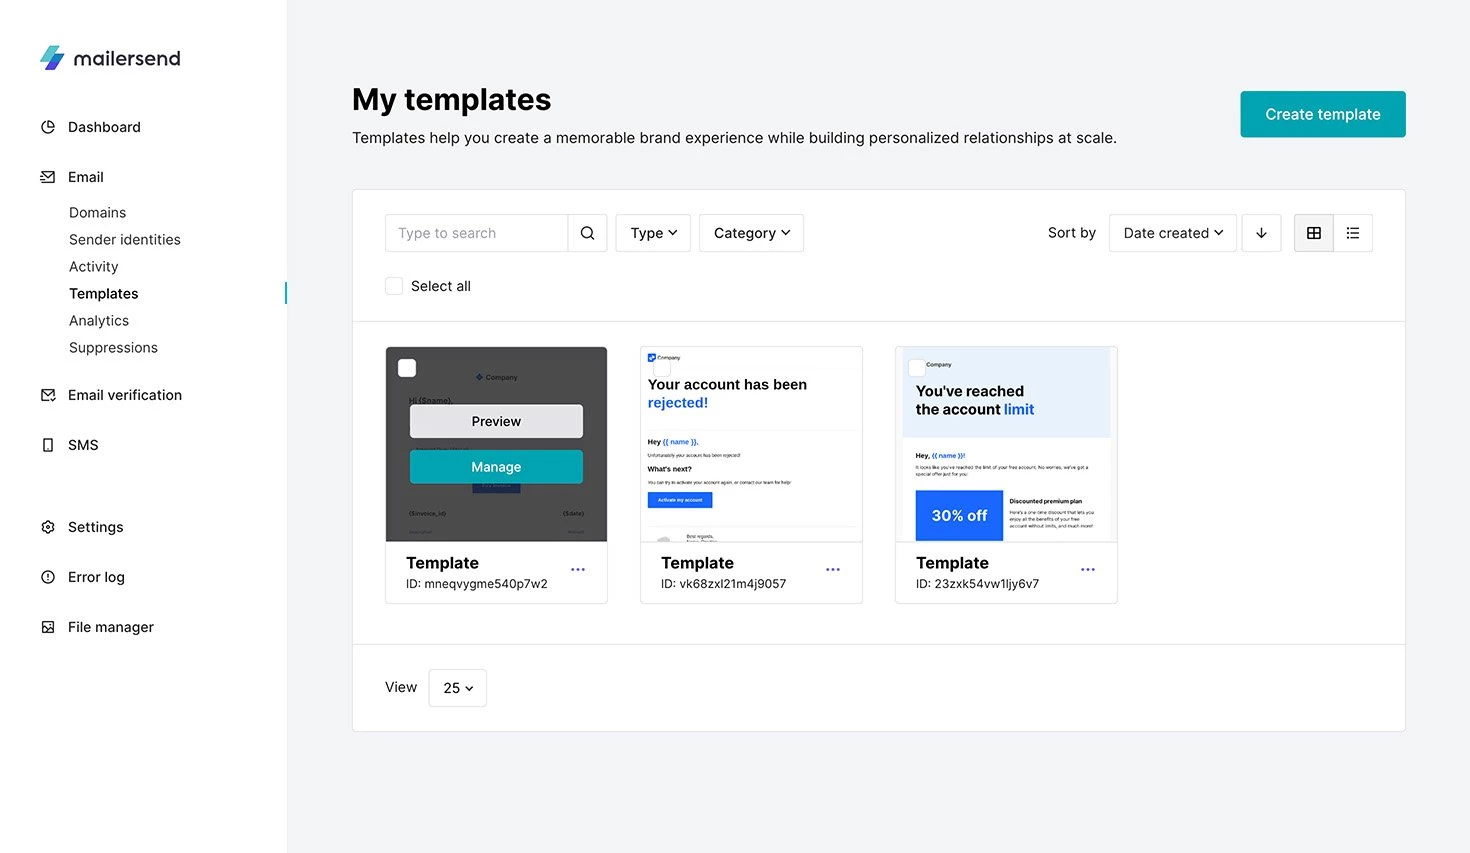 View of templates with how to edit and add a category.